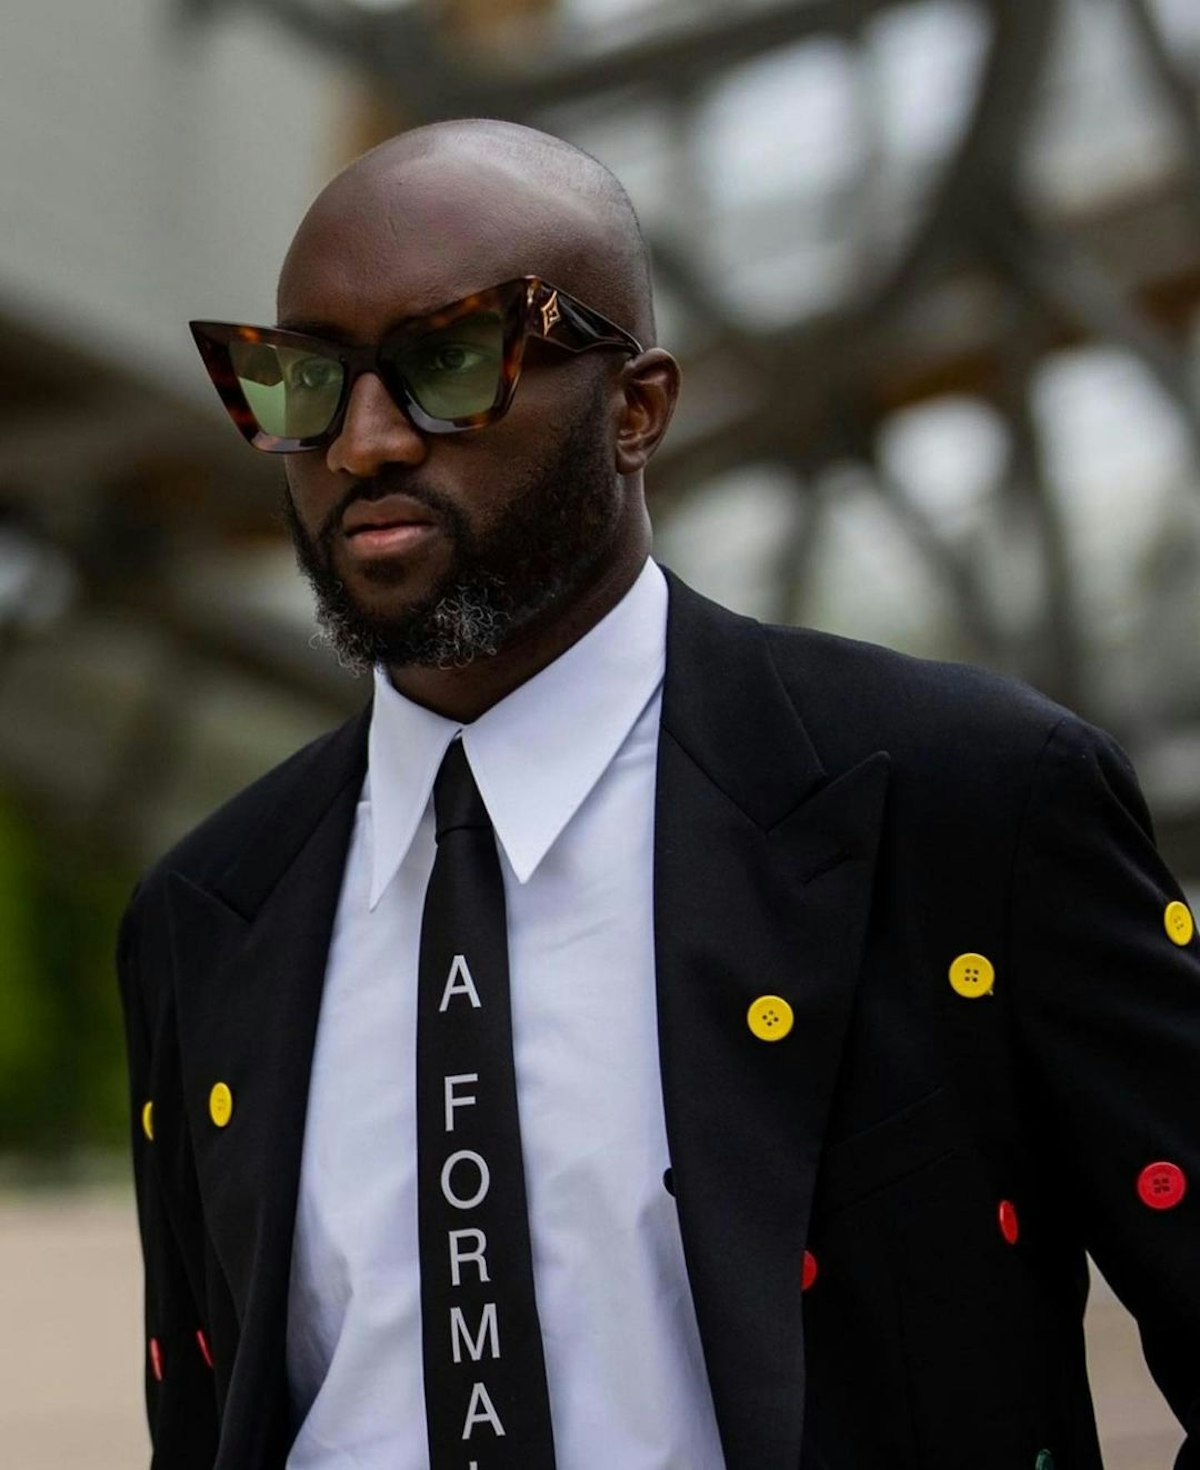 Virgil Abloh's Death and the Sudden Spike in Off-White Sneaker Prices